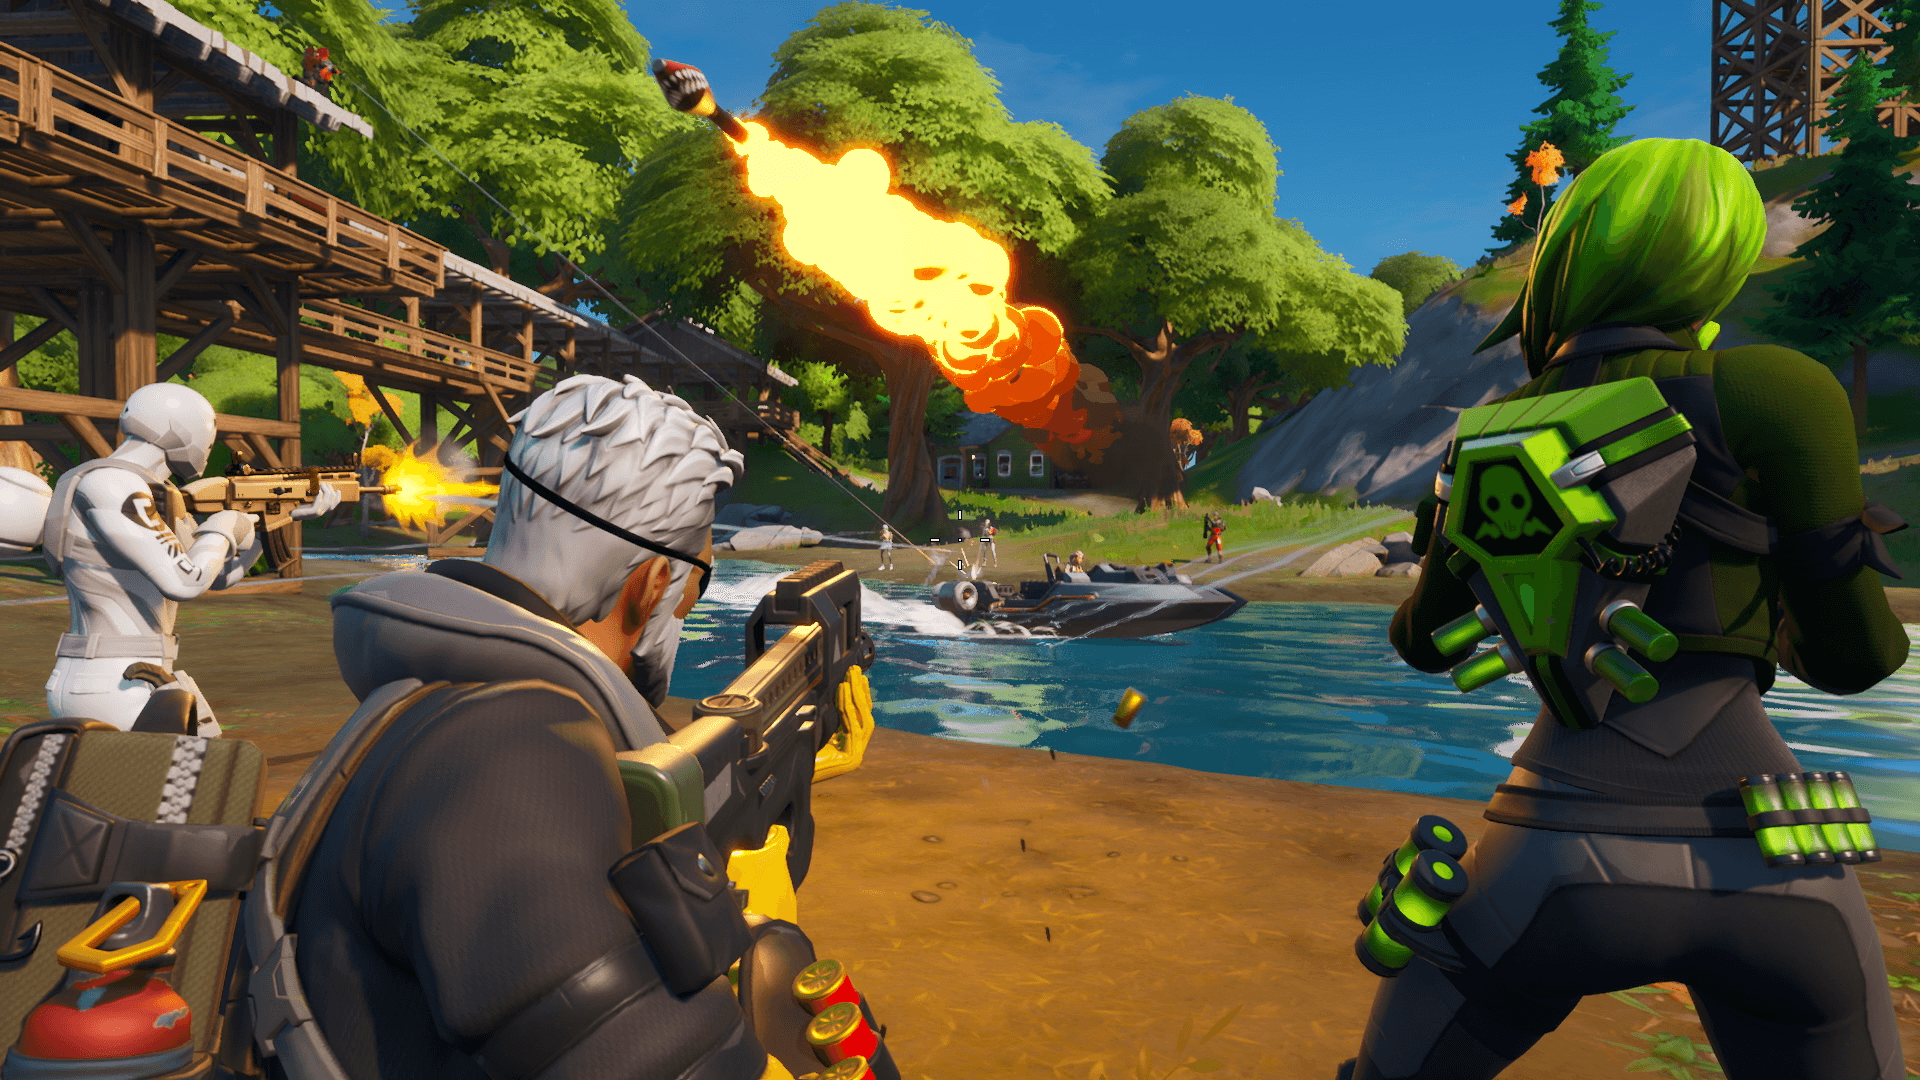 Fortnite Made $1.8 Billion in 2019, Despite 25% Drop from Previous Year